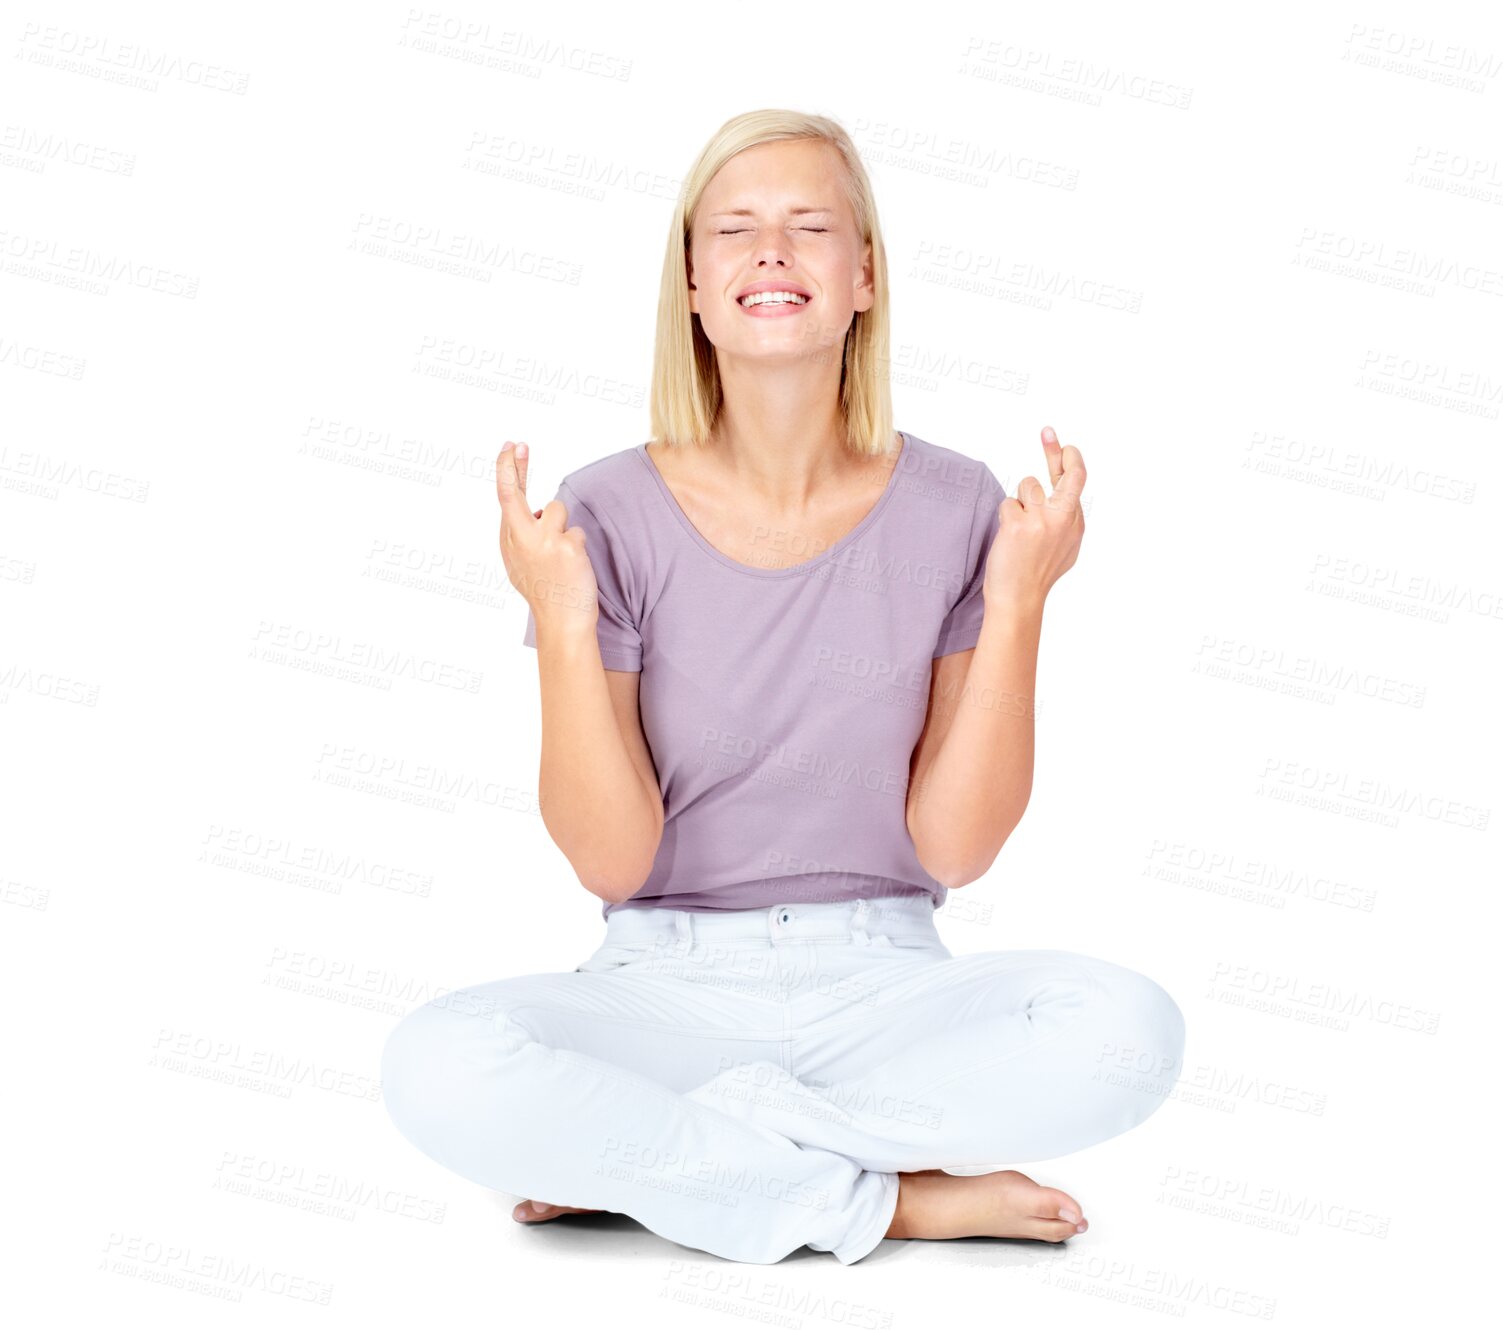 Buy stock photo Fingers crossed, woman and good luck sign on a floor with hope on isolated, transparent and png background. Hand, icon and female with wish, gesture and emoji symbol for optimism while sitting